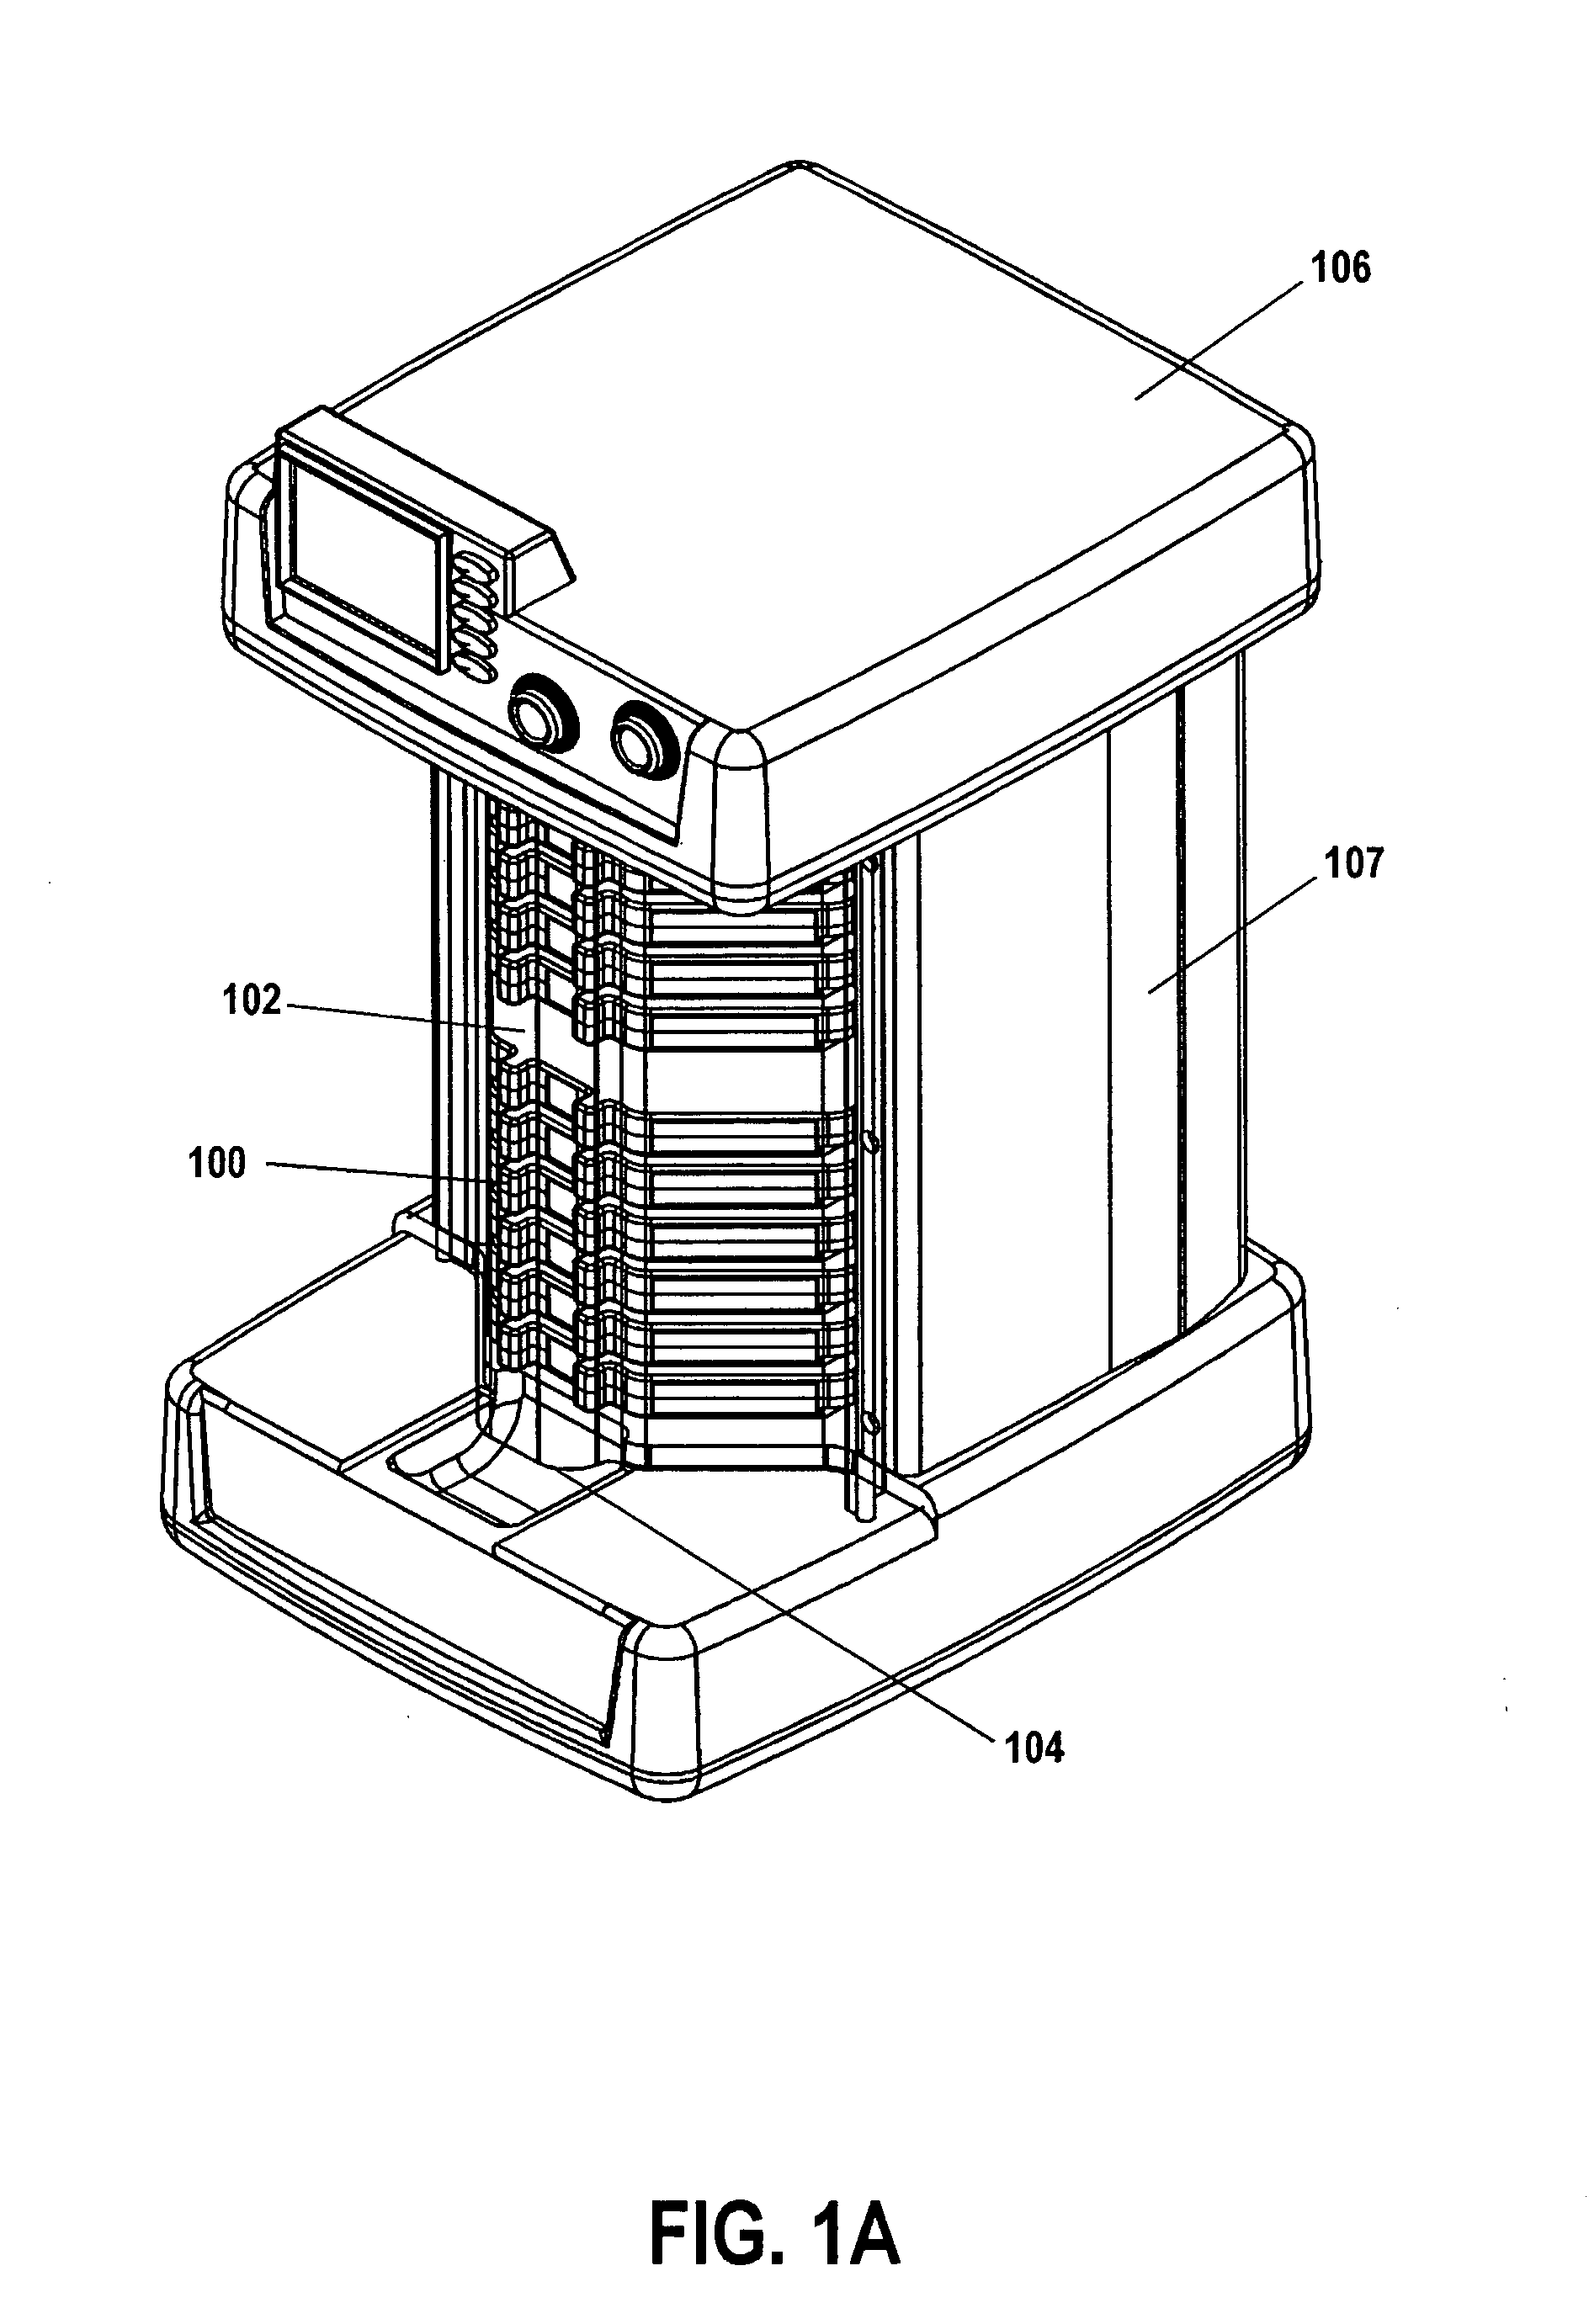 Medicament tray inventory system and method